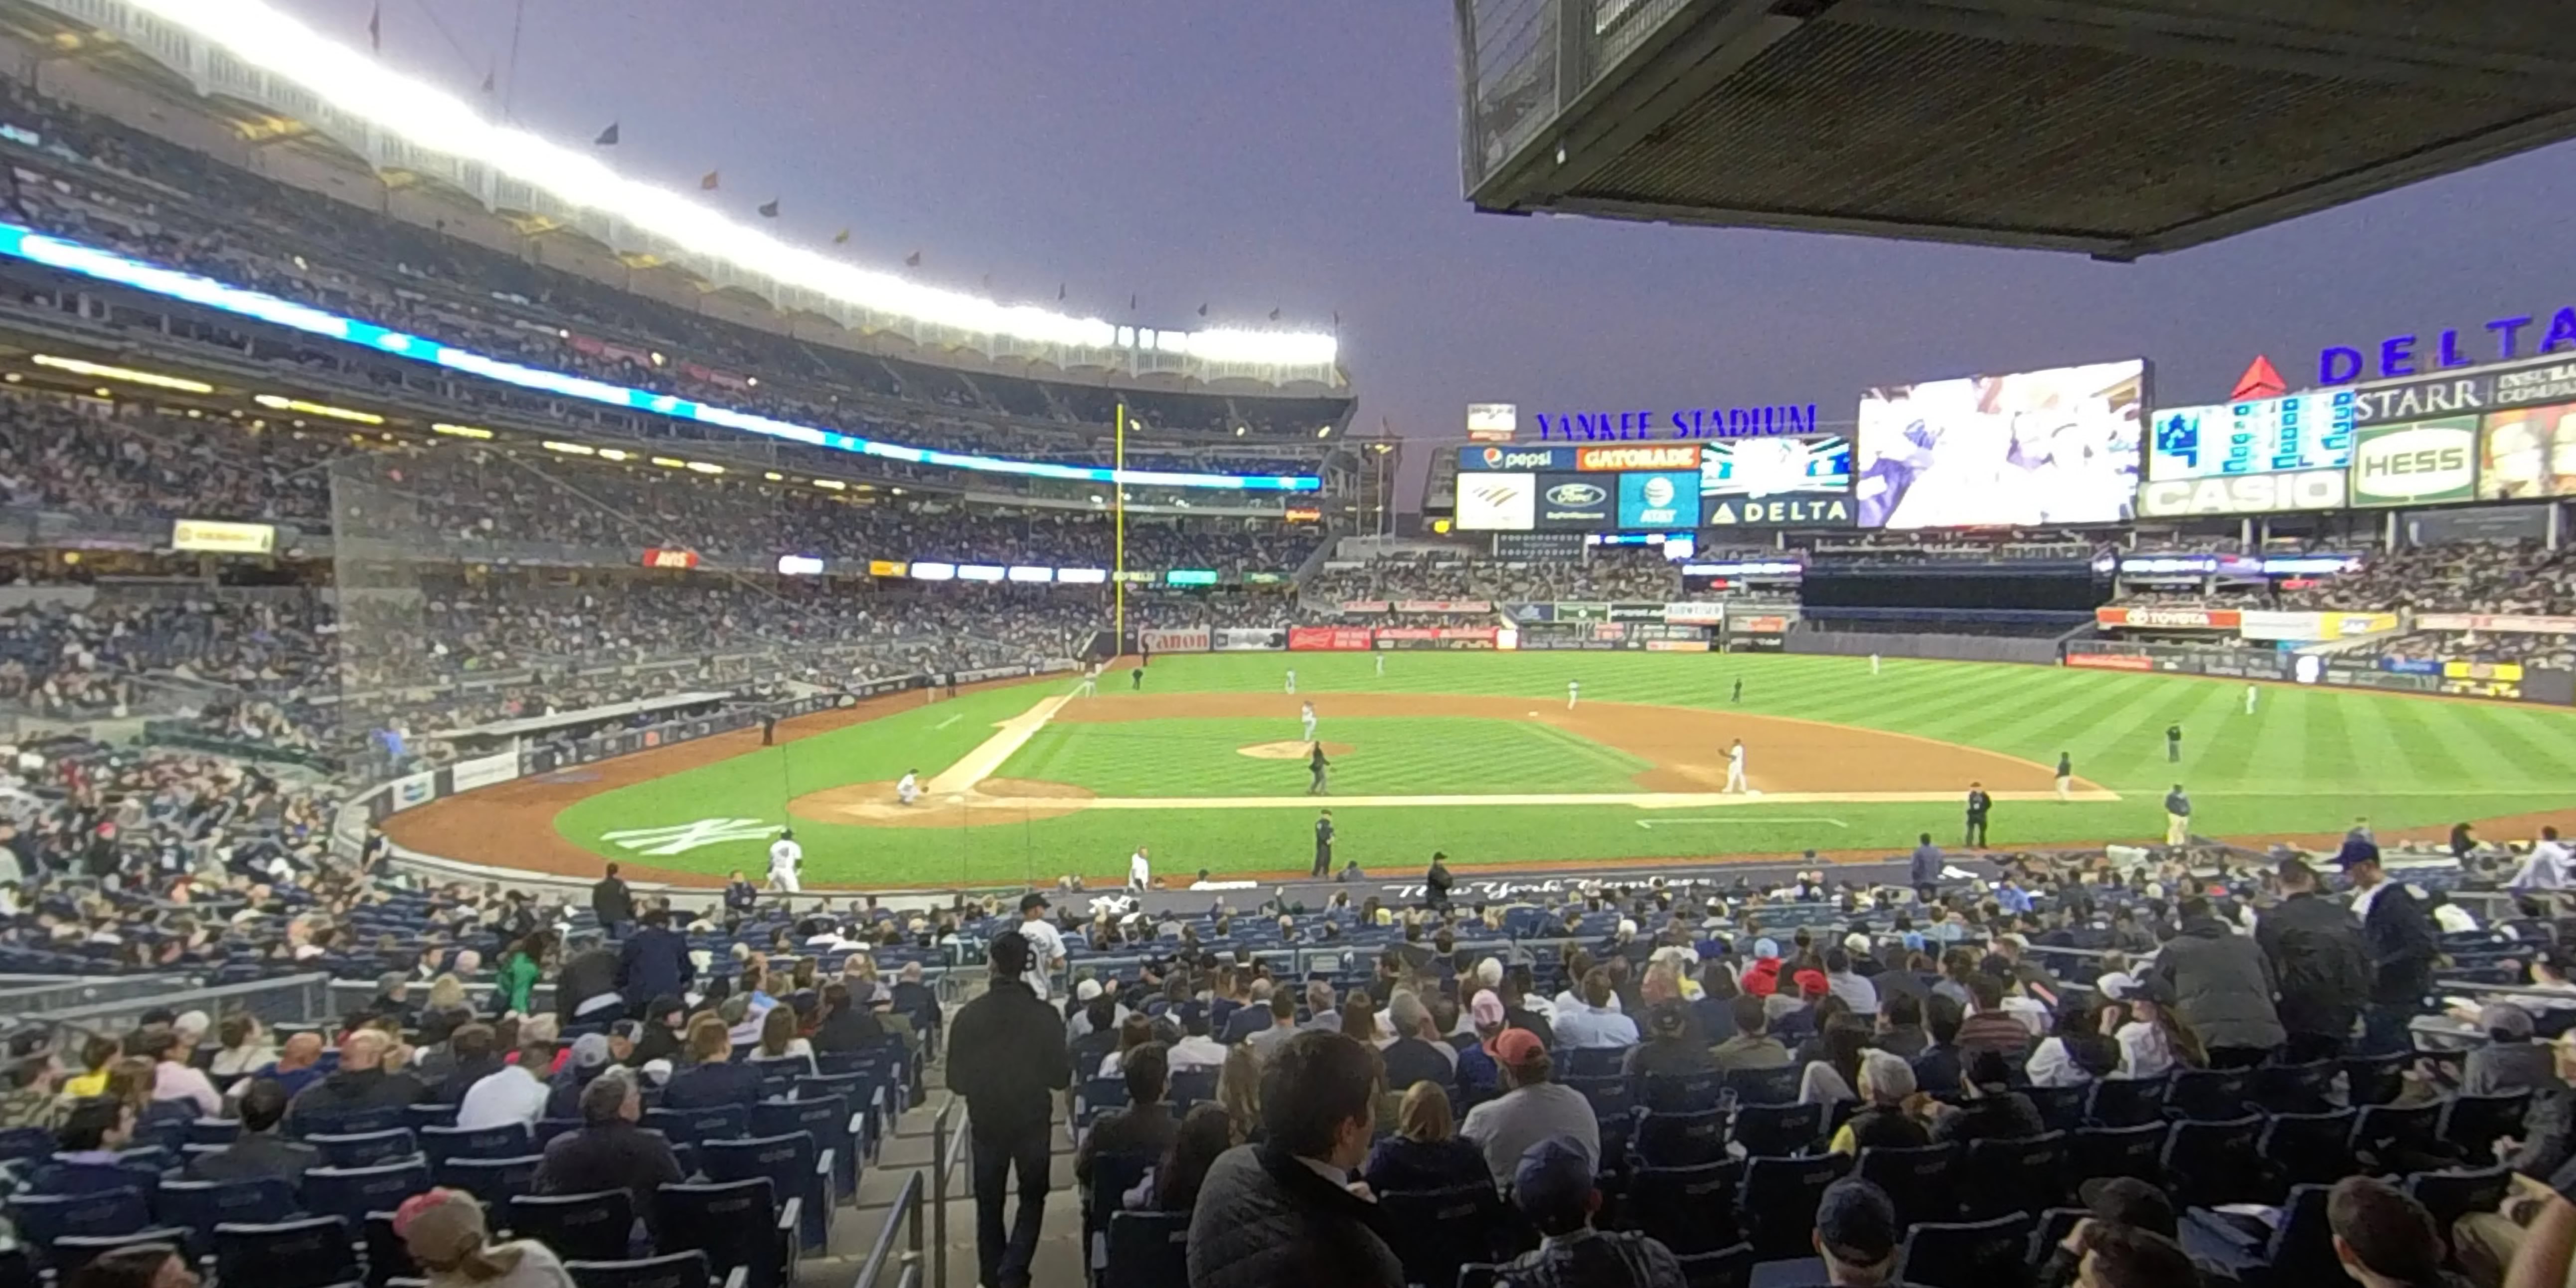 section 117a panoramic seat view  for baseball - yankee stadium